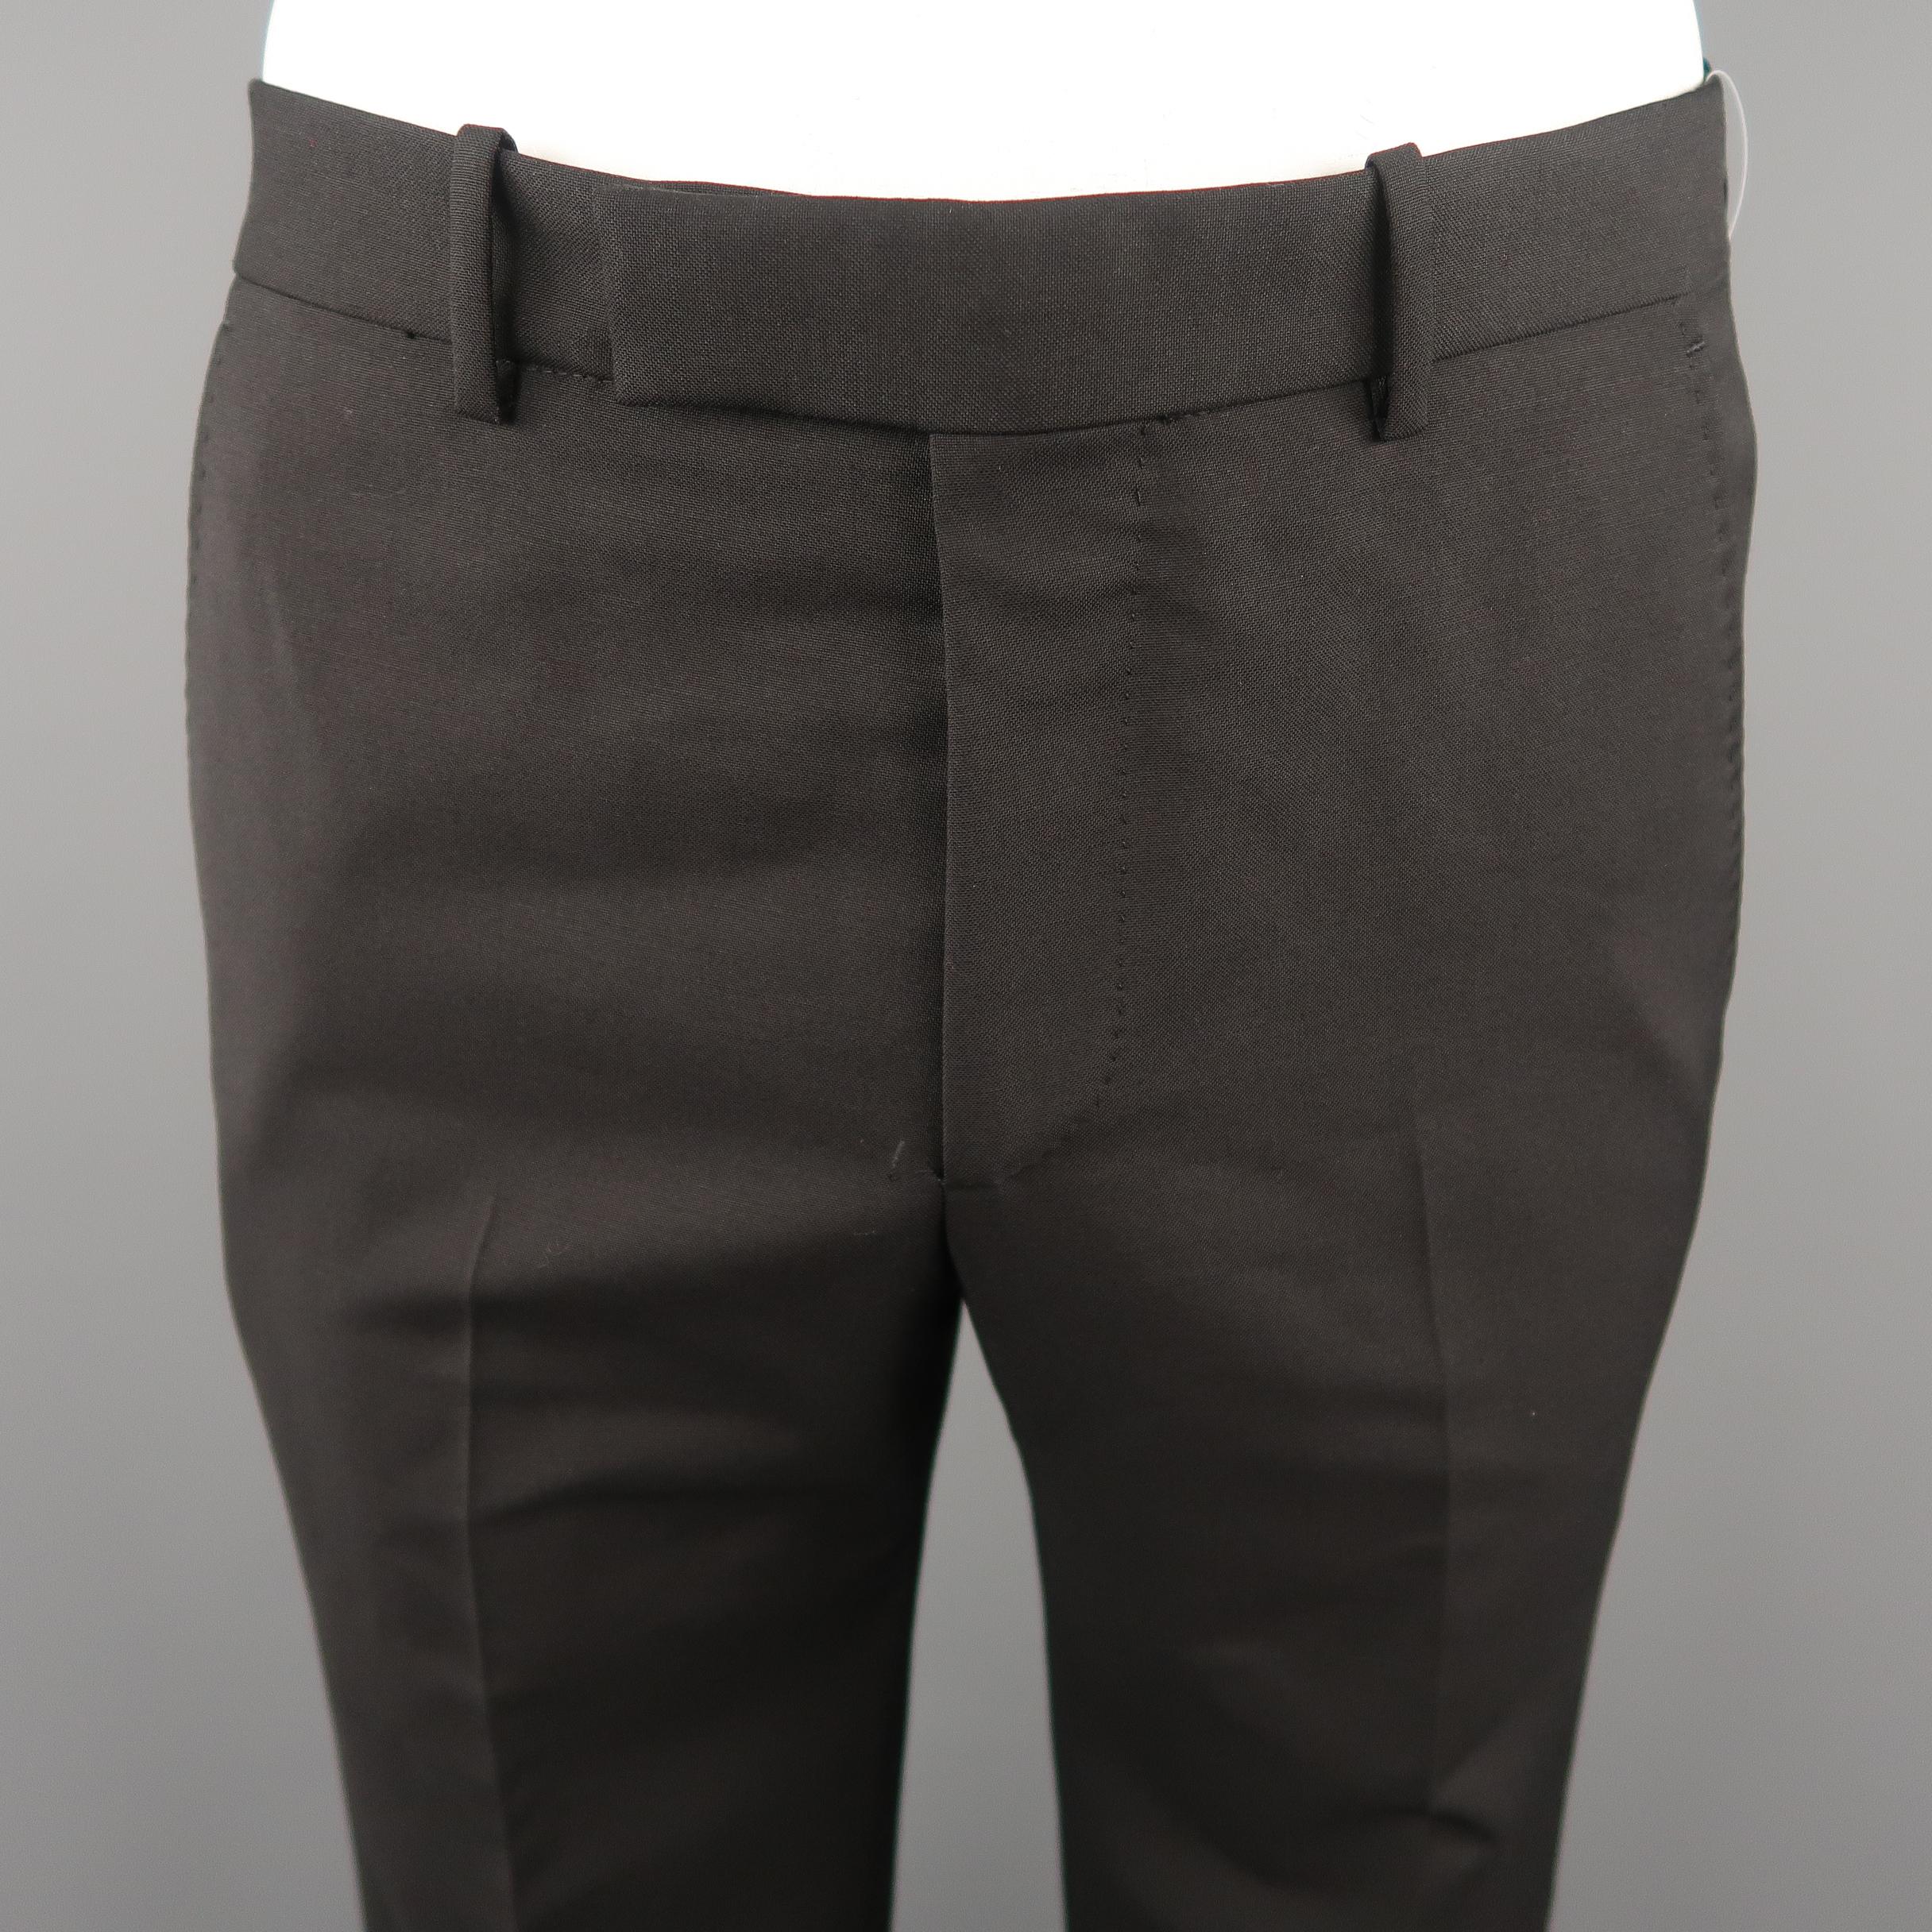 ALEXANDER MCQUEEN dress pants come in black solid wool material, featuring flat front, front tab, zip fly, seam and slit pockets. 
Made in Italy.
 
Excellent  Pre-Owned Condition.
Marked: 50 IT
 
Measurements:
 
Waist:  35  in.
Rise: 12  in.
Inseam: